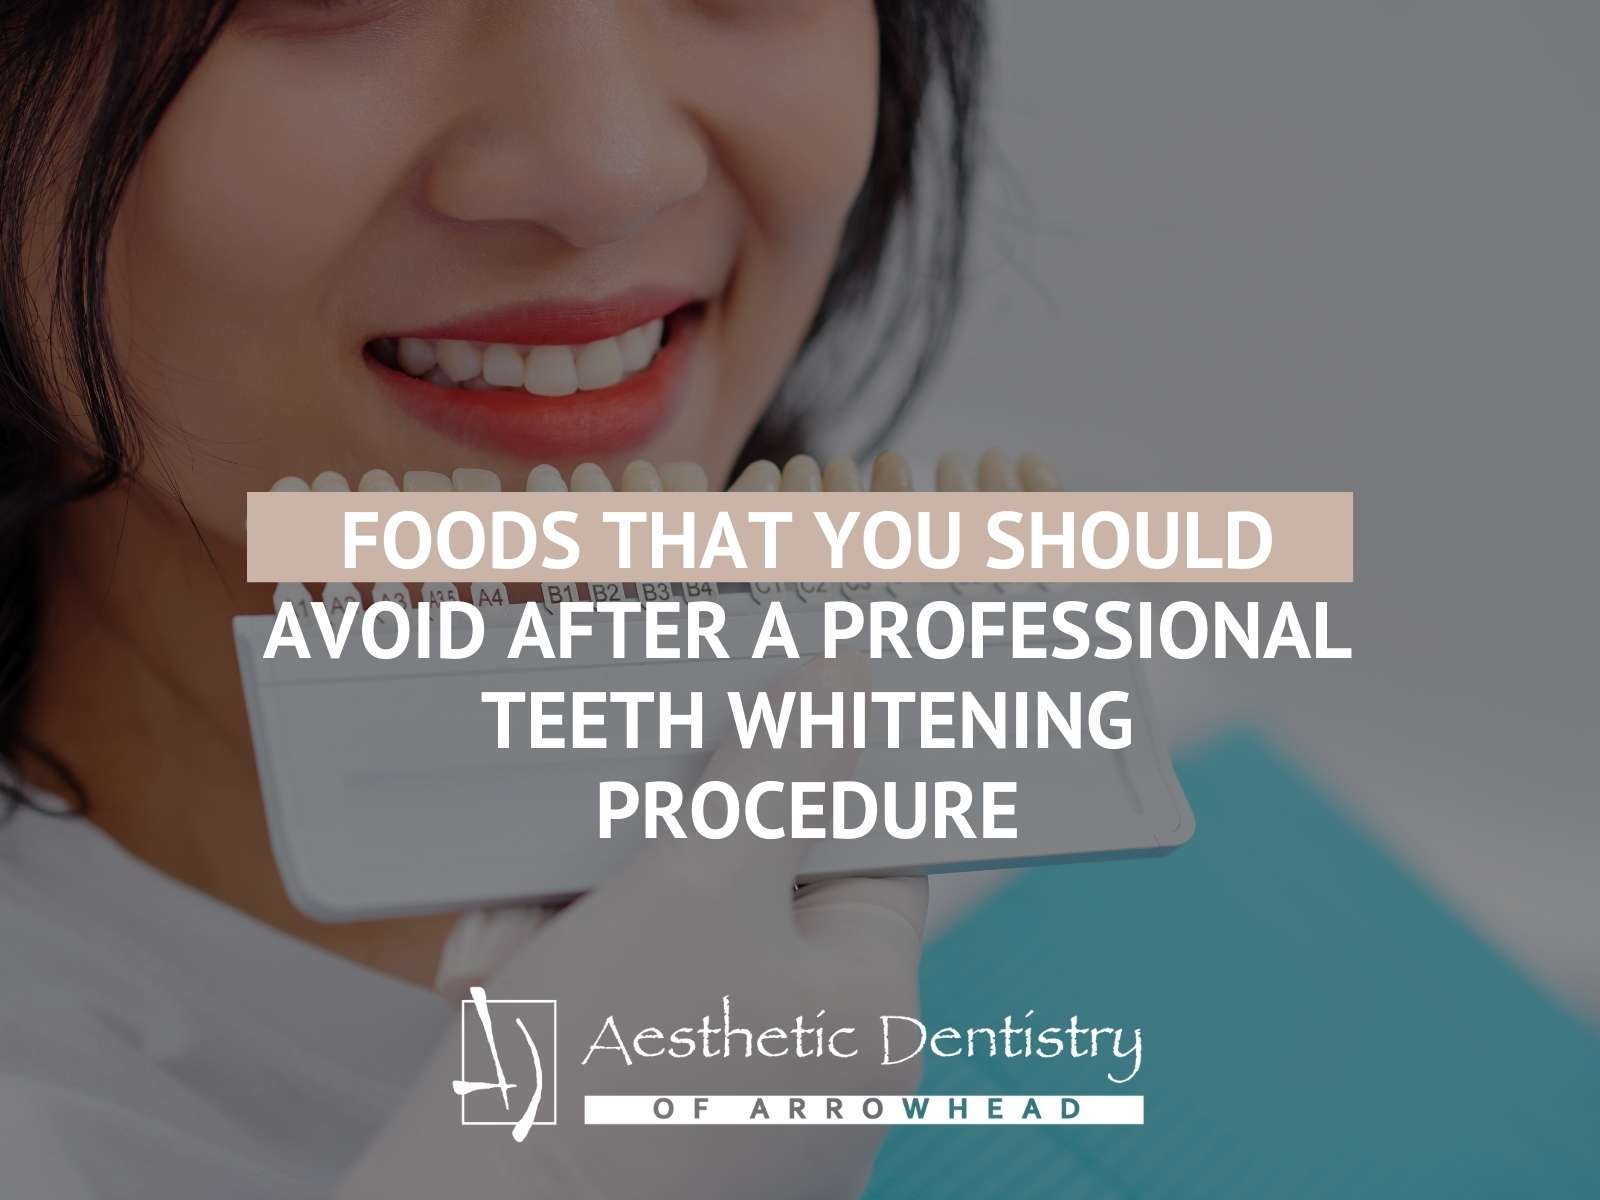 Foods That You Should Avoid After a Professional Teeth Whitening Procedure